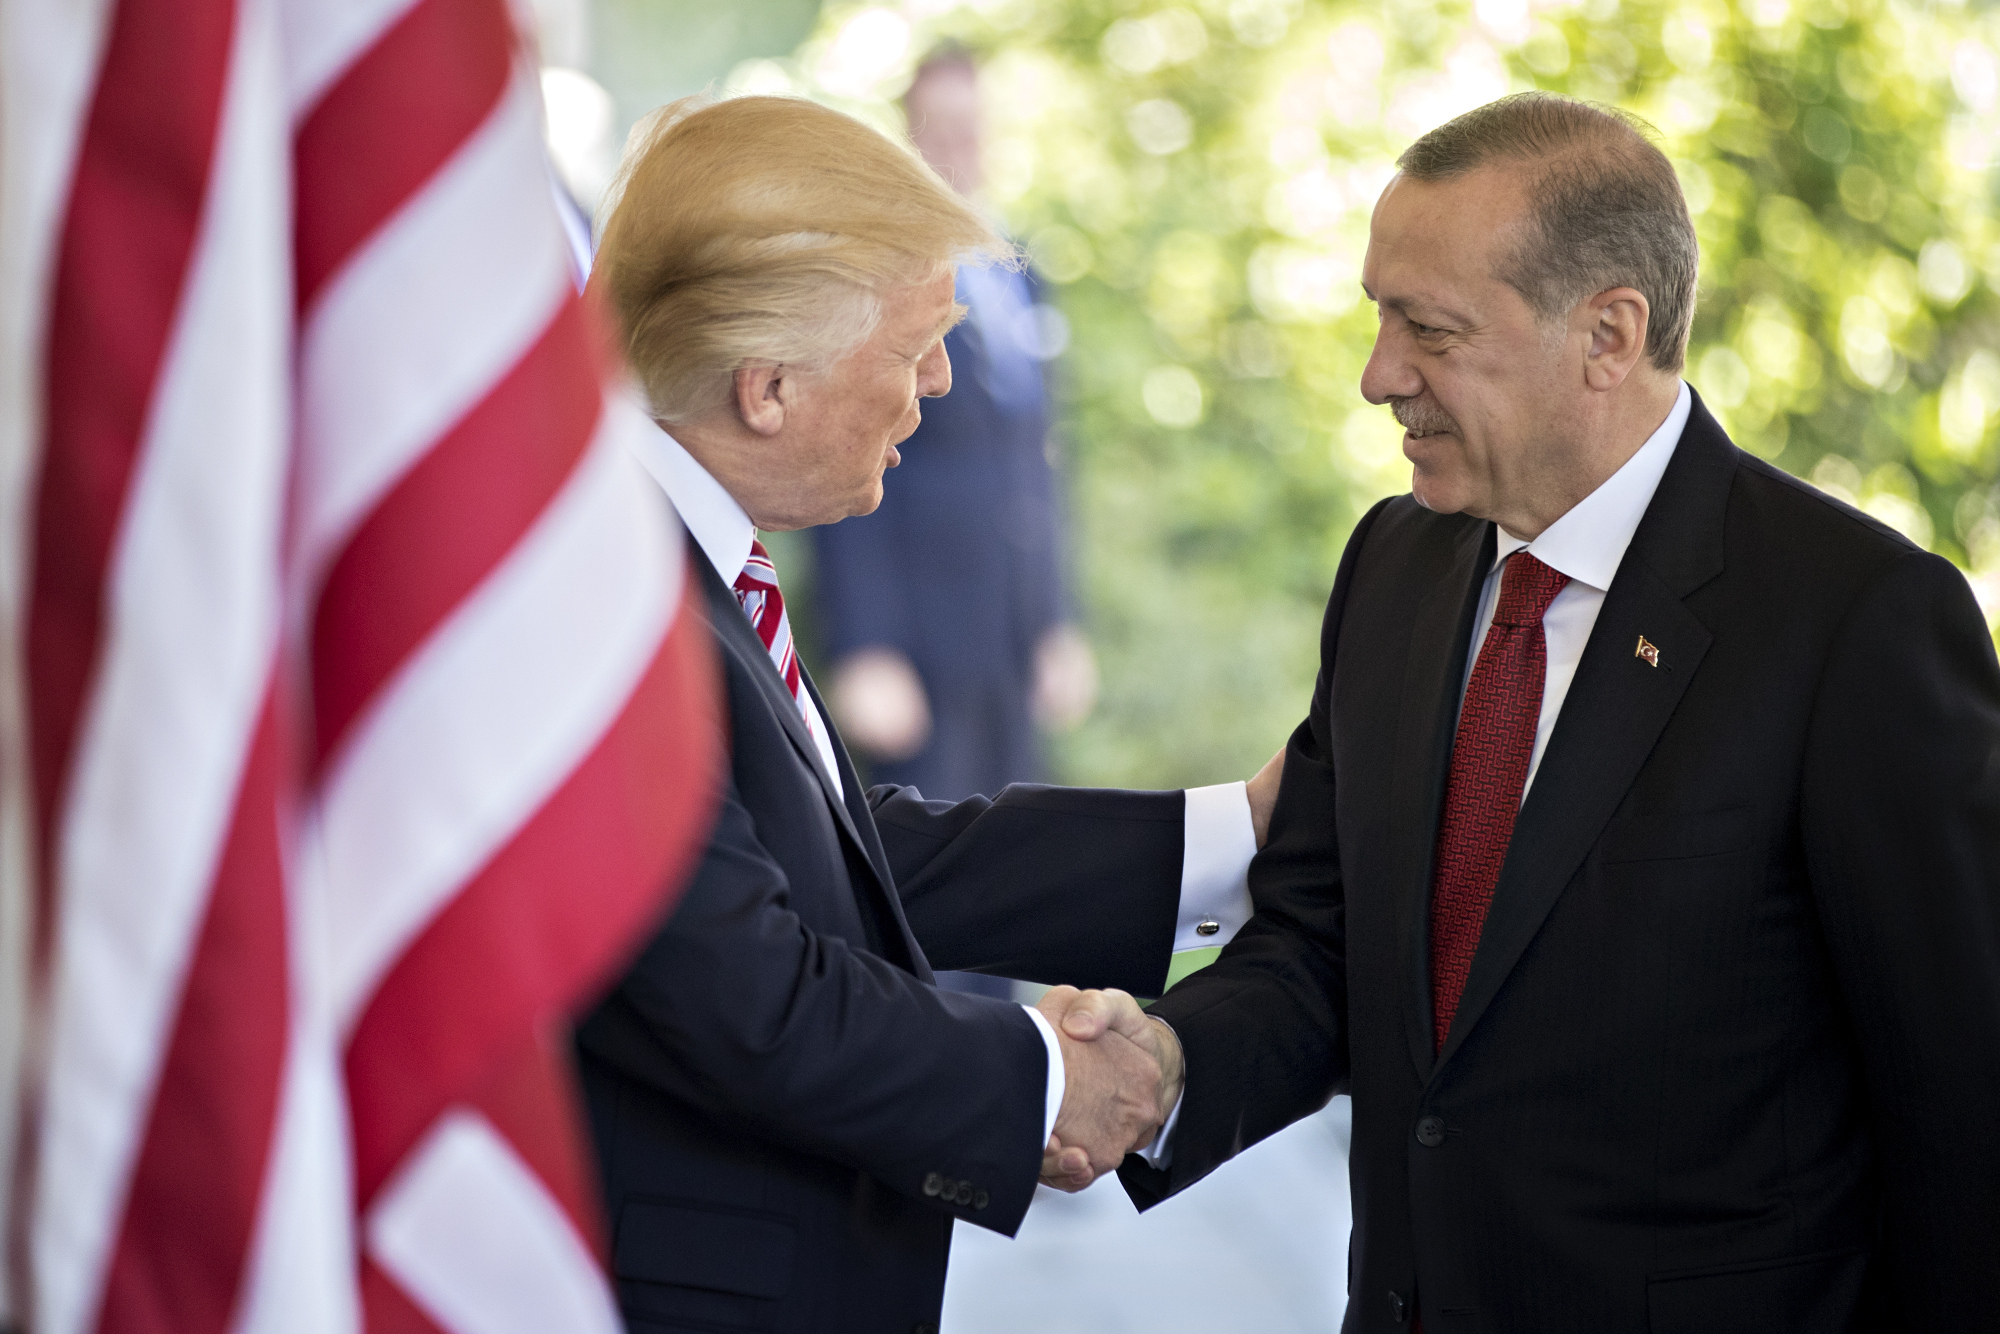 Donald Trump shakes hands with Recep Tayyip Erdogan the White House in Washington on May 16, 2017.